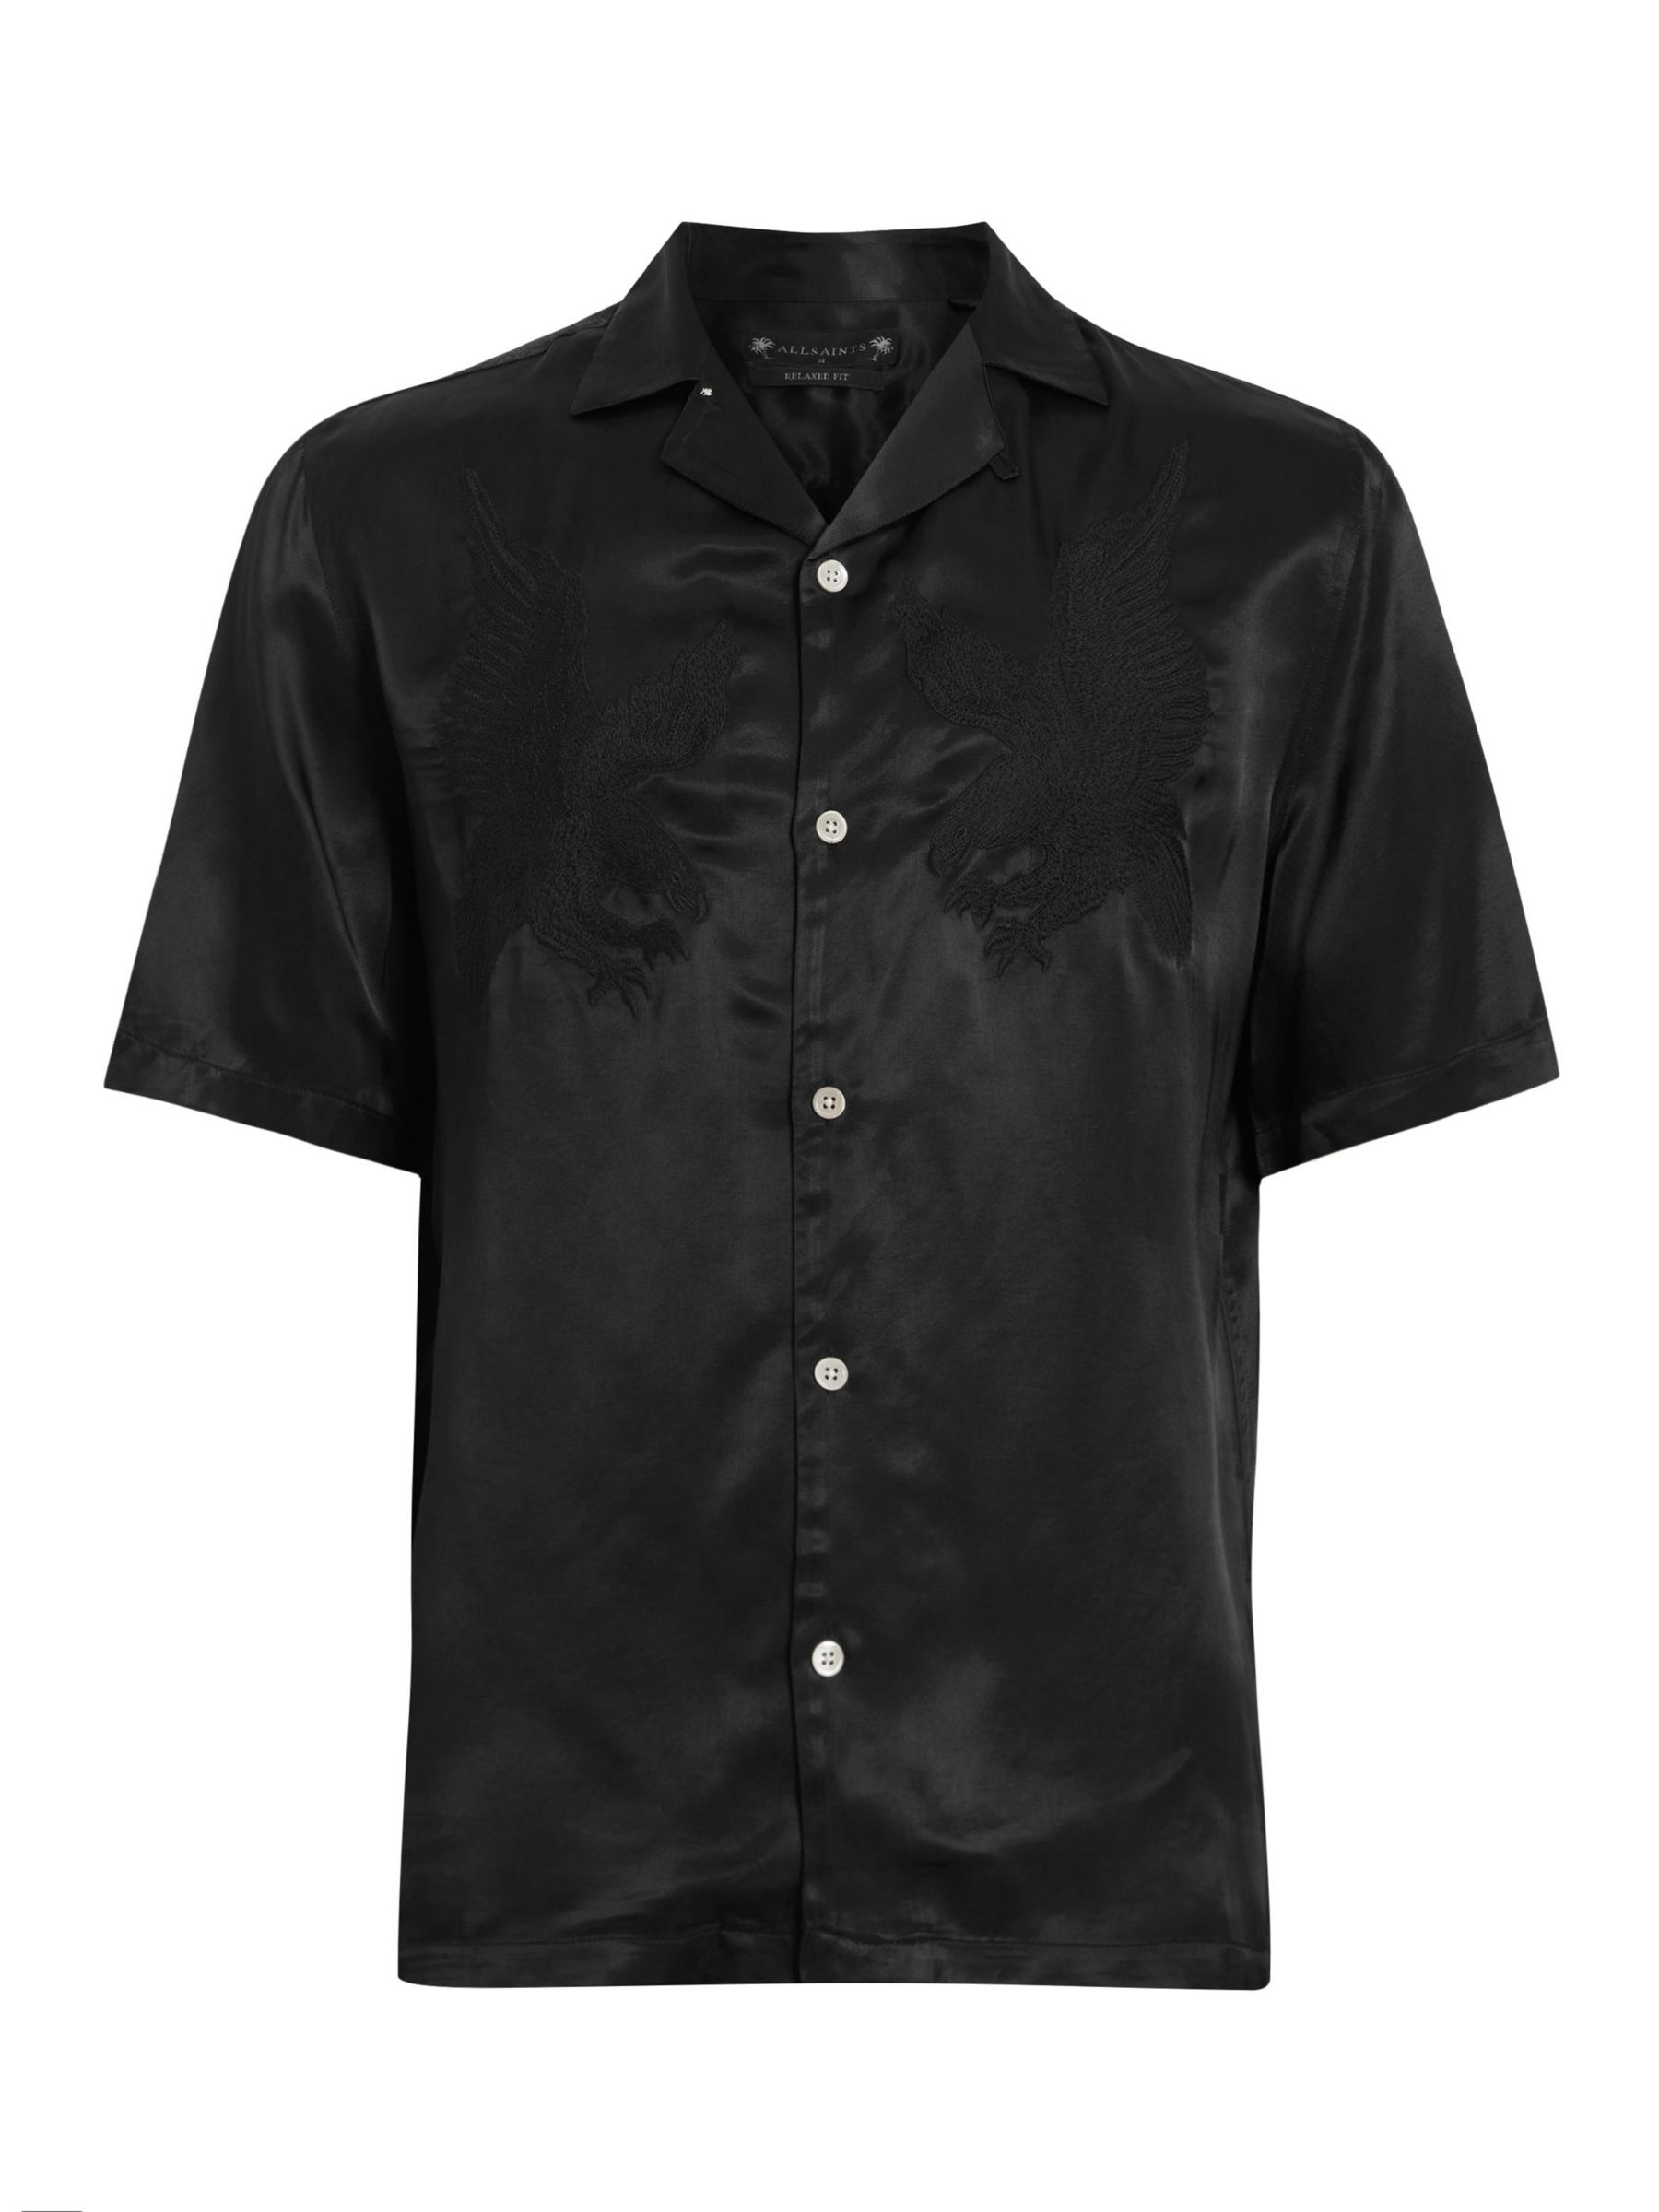 AllSaints Aquila Eagle Embroidered Relaxed Fit Satin Shirt, Jet Black, L